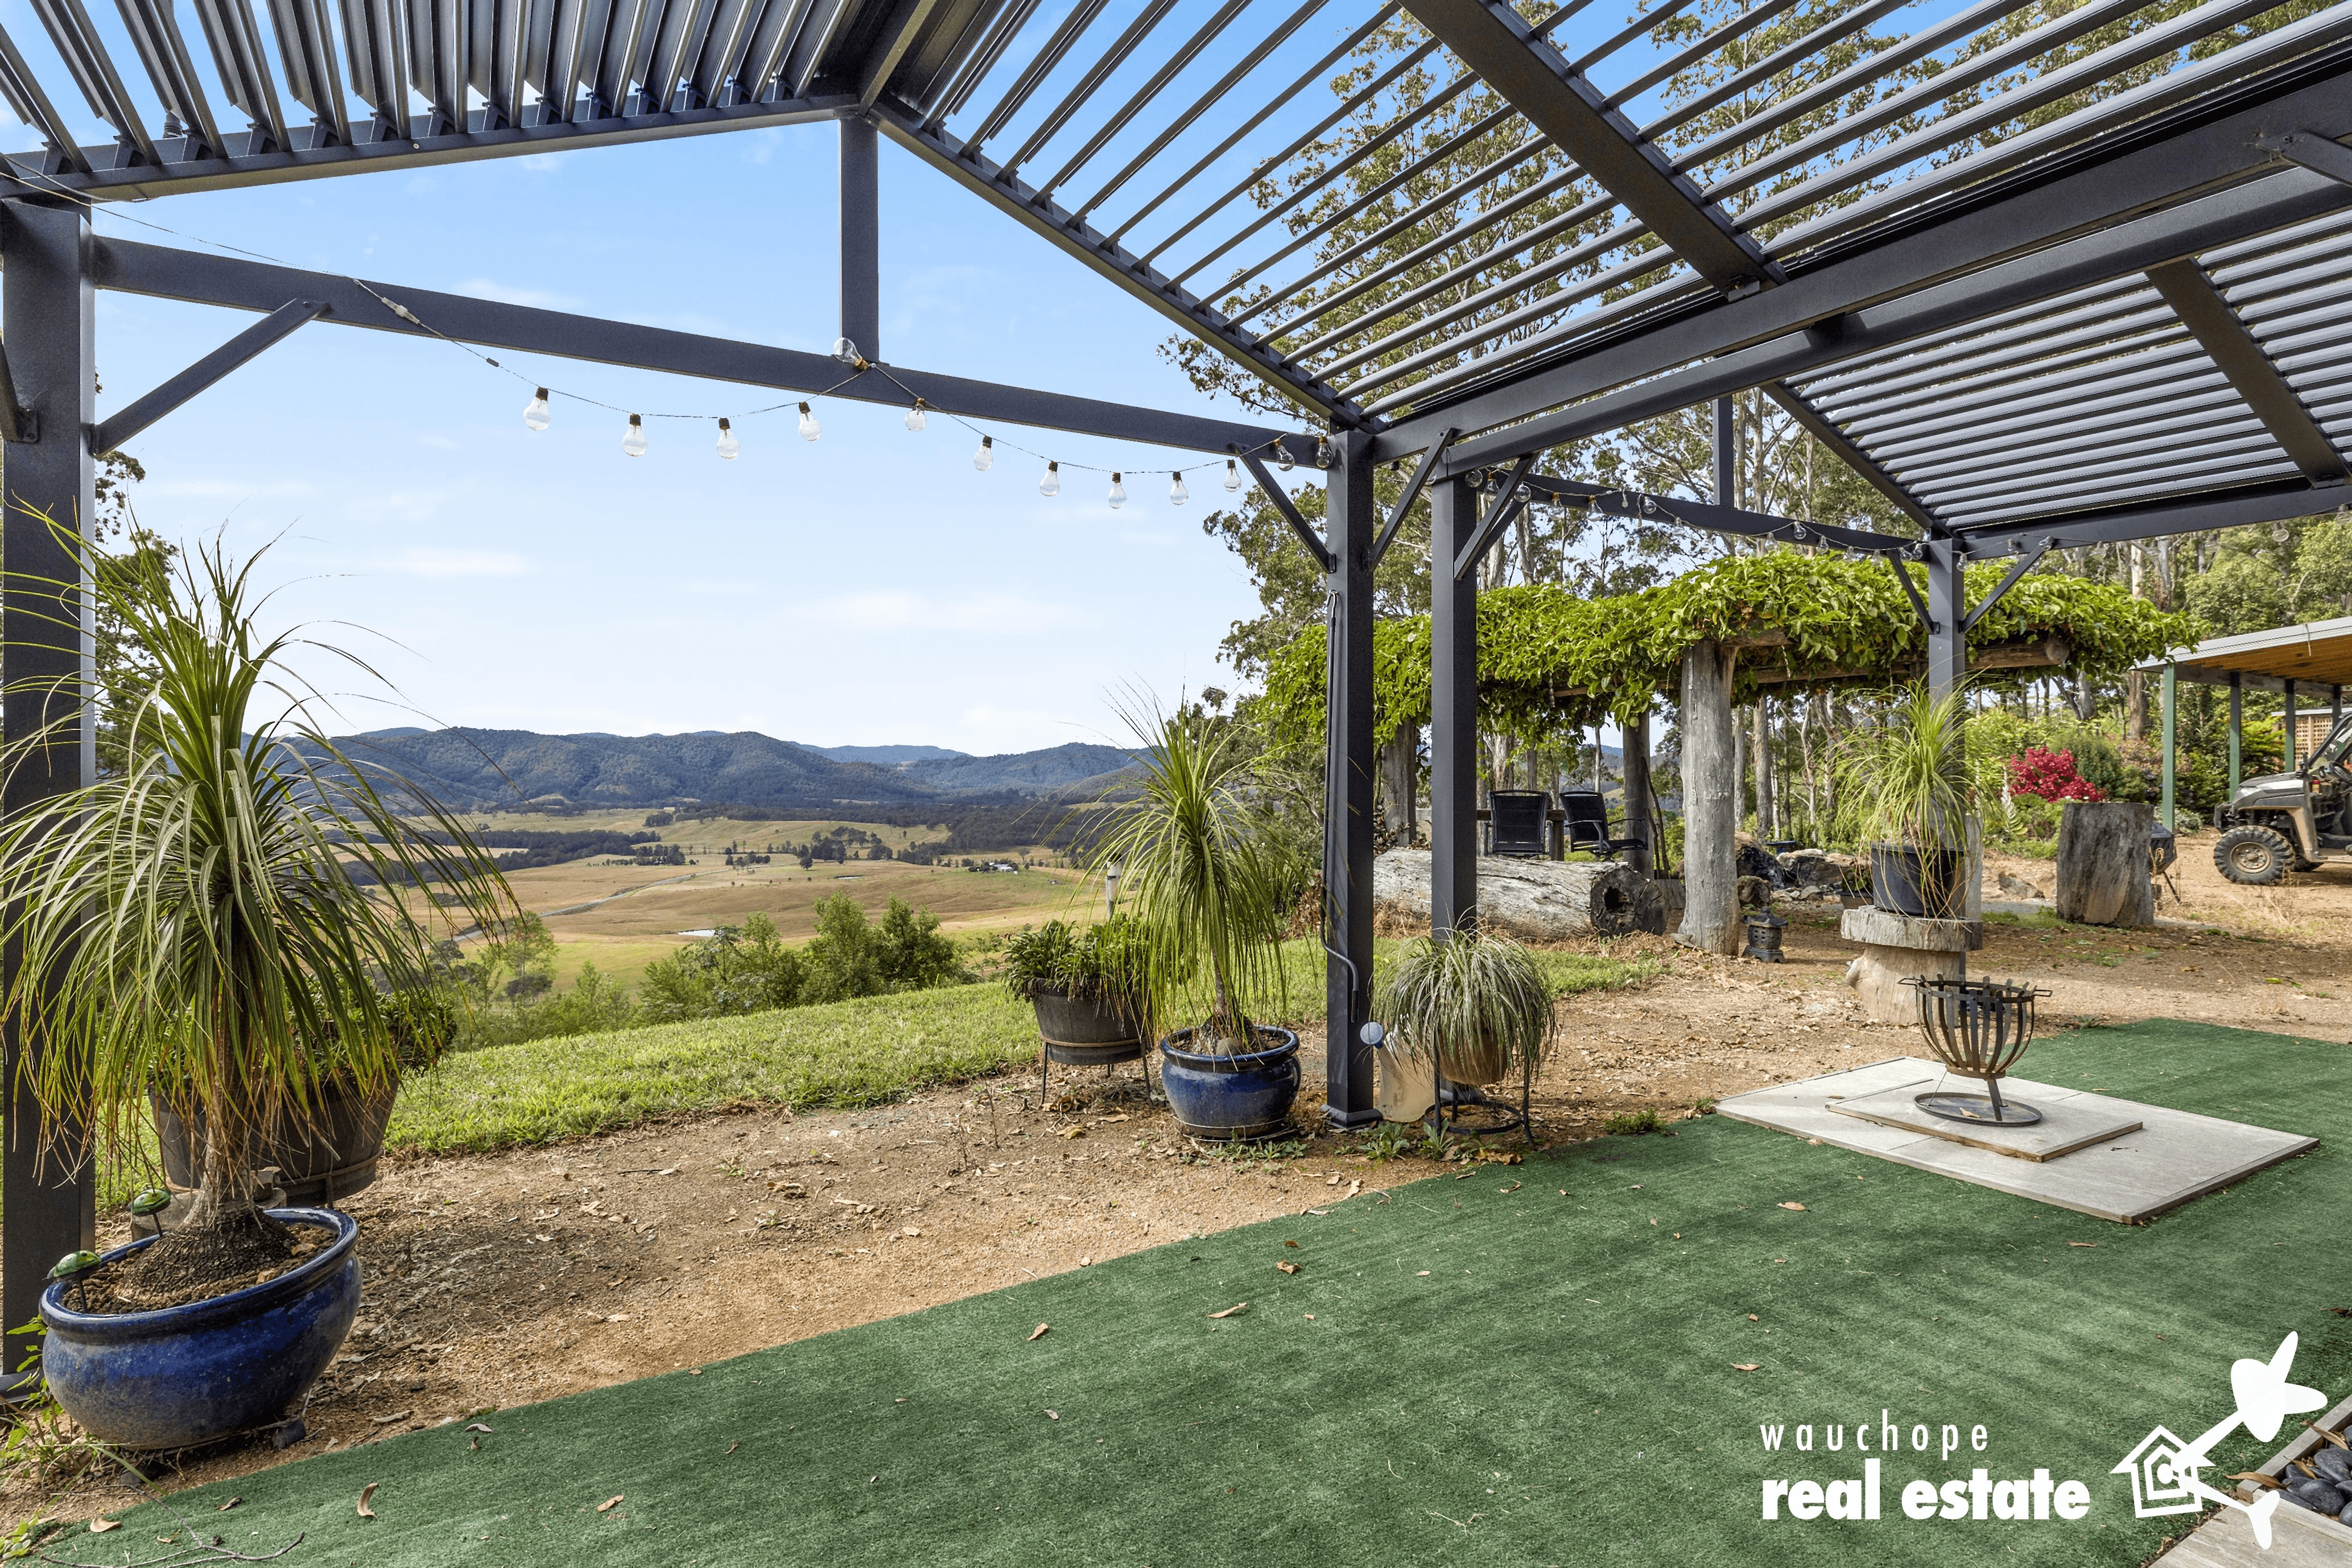 6295 Oxley Highway, YARRAS, NSW 2446